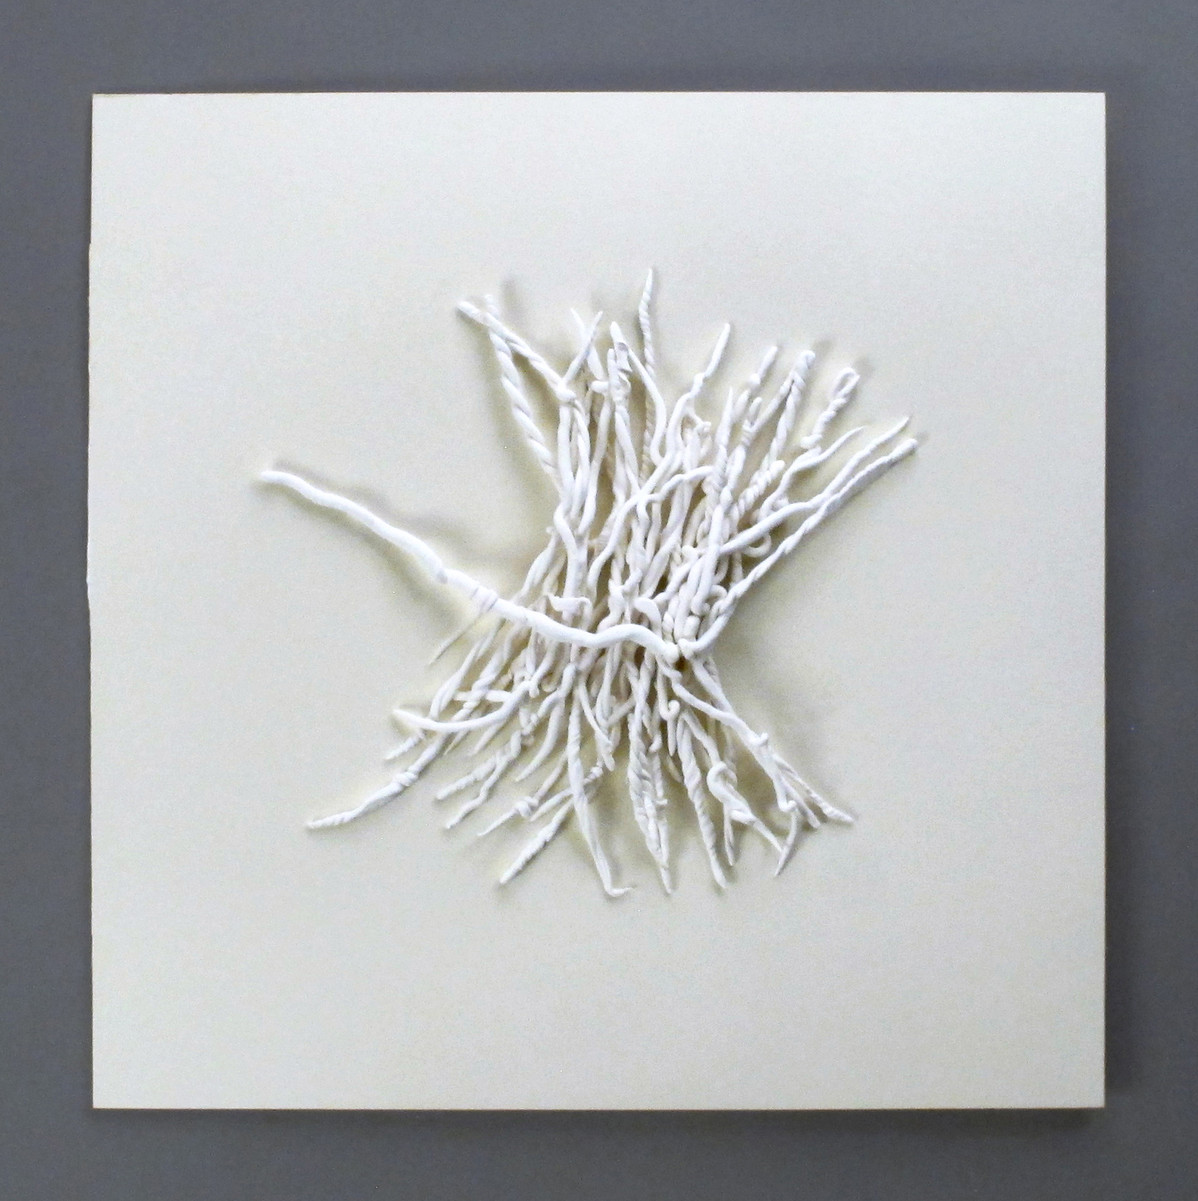 Ellen Schiffman – Series inspired by White on White boxes in